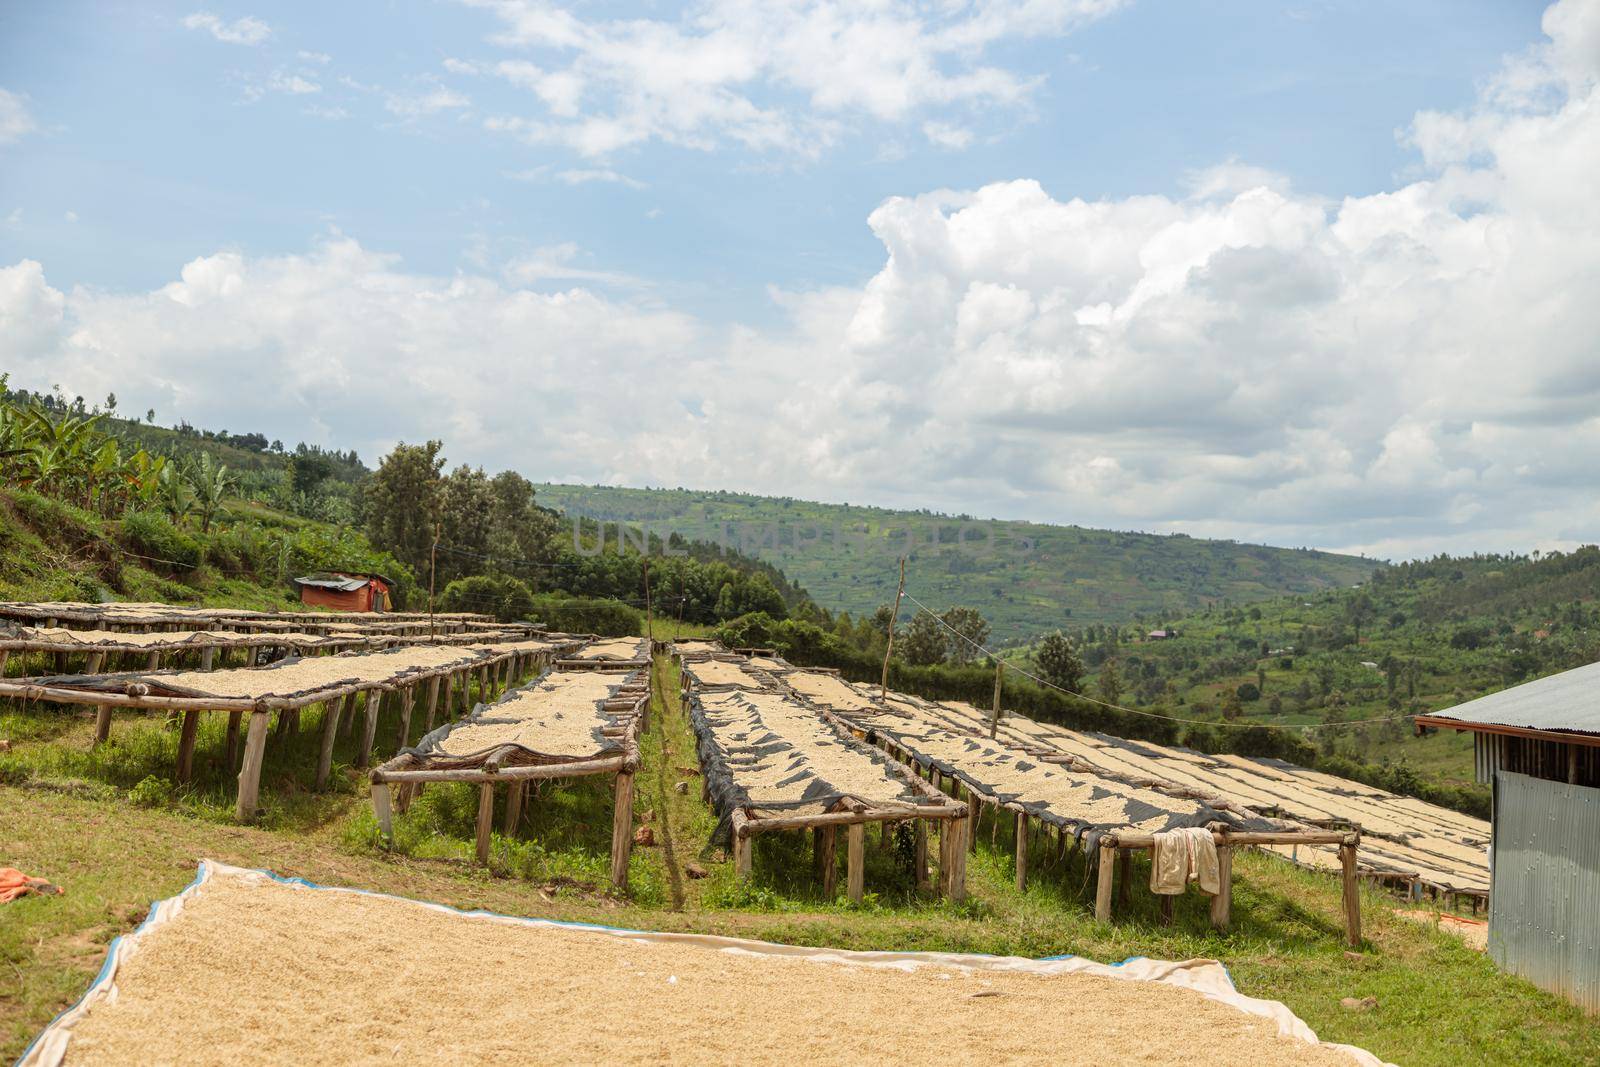 Wooden tables for drying on a hillside in a coffee farm by Yaroslav_astakhov